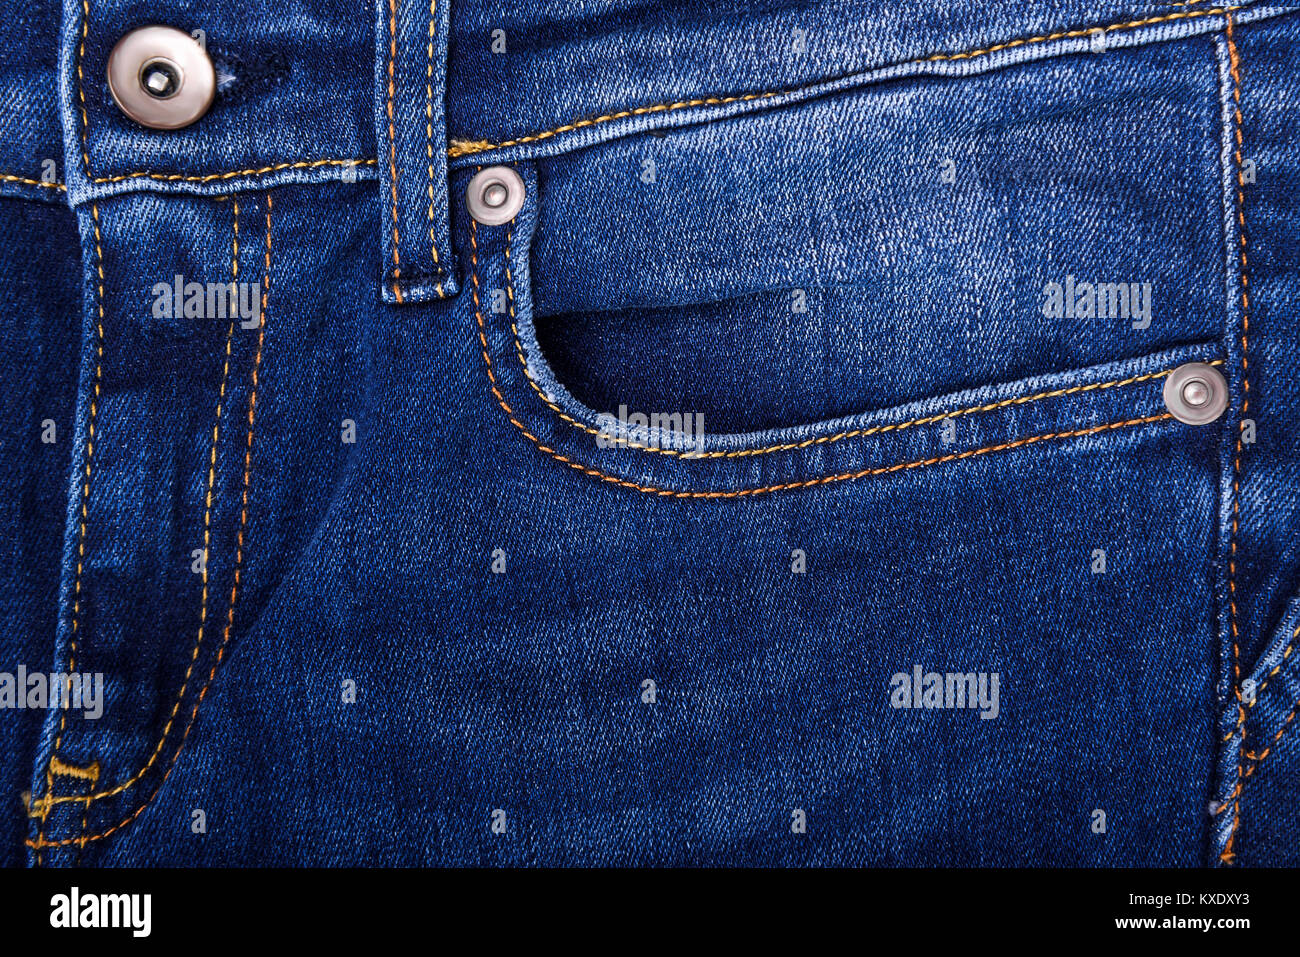 Jeans upper part of the pocket Stock Photo - Alamy